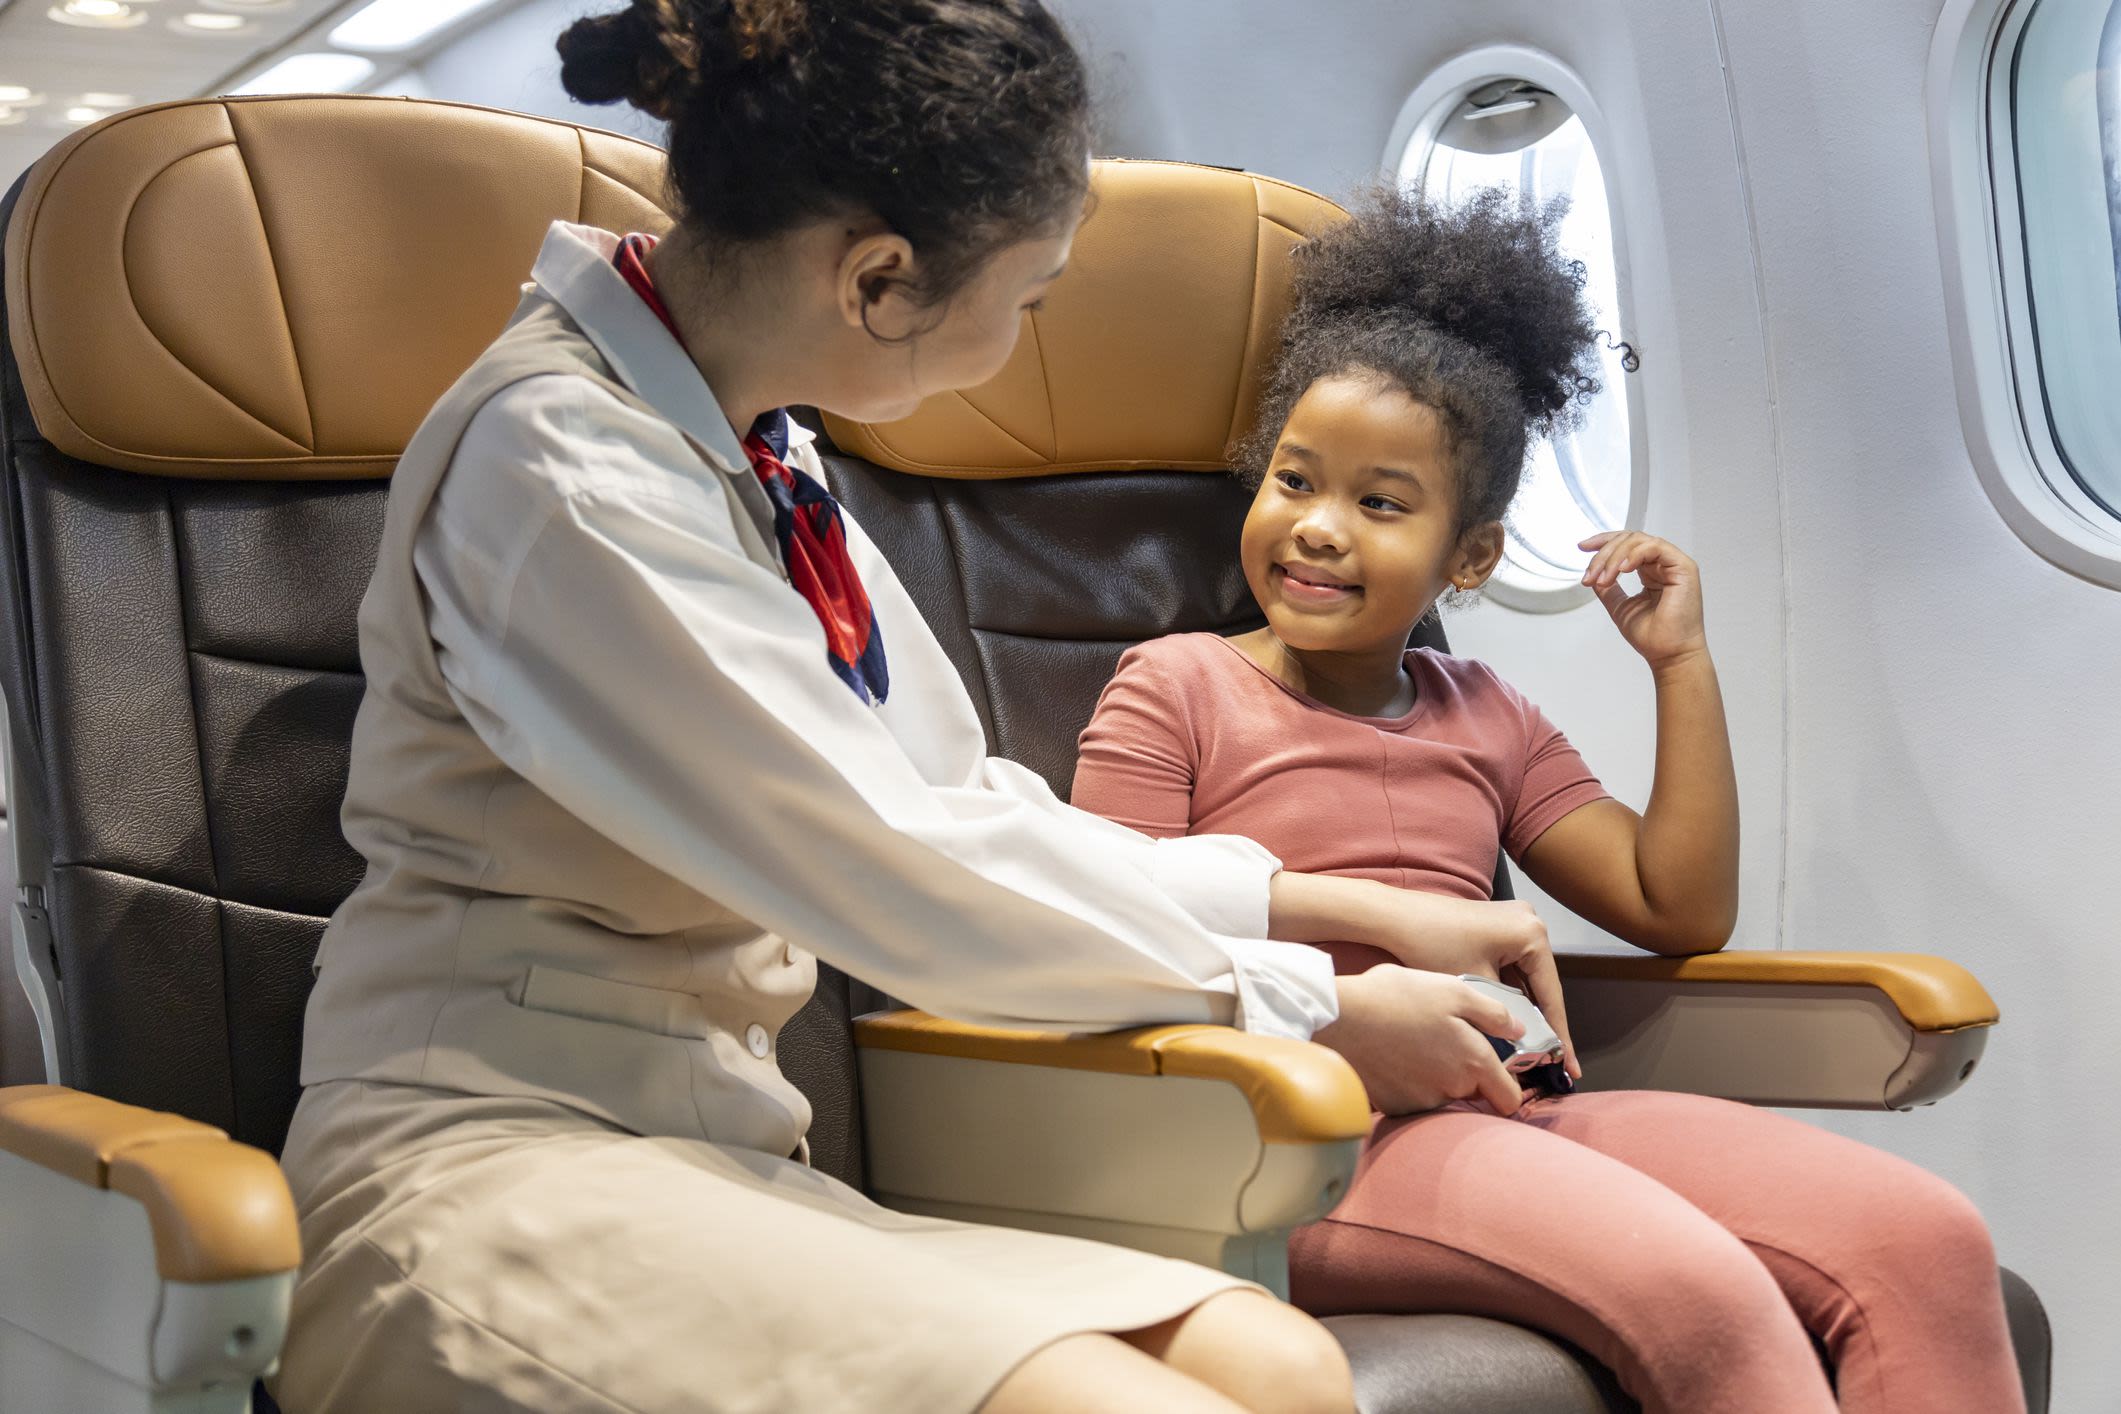 Parents: This Is the Worst Thing You Can Let Your Children Do on an Airplane